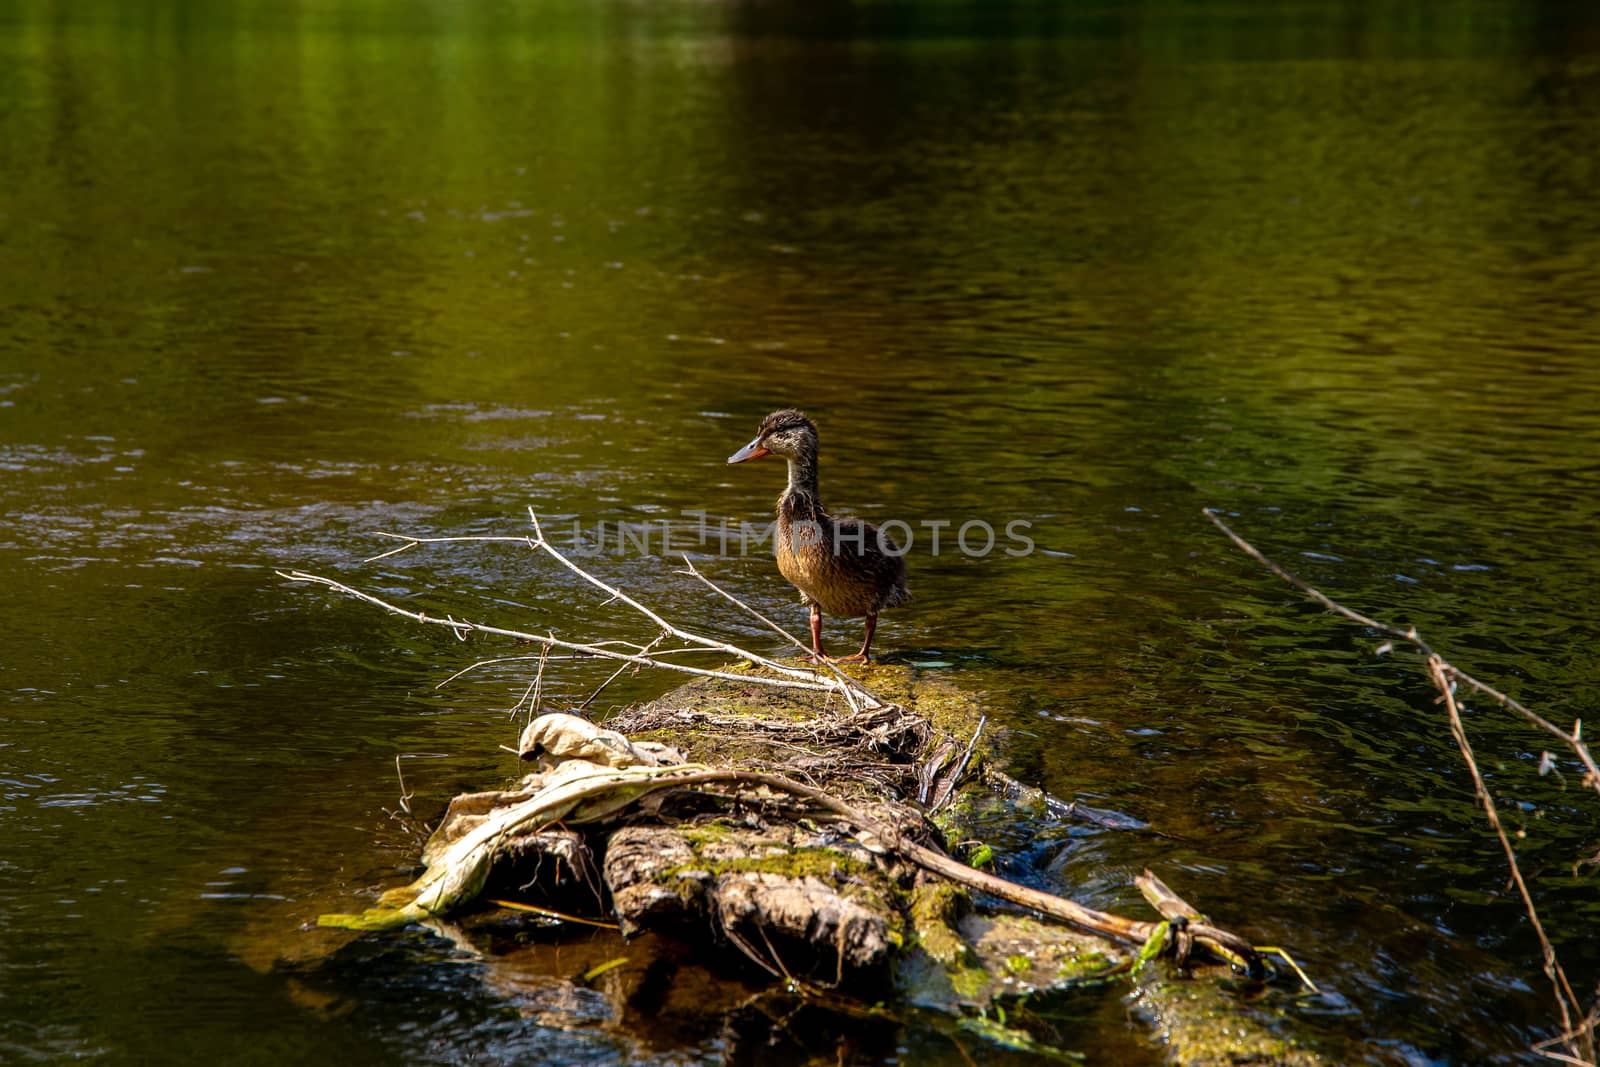 Duck swimming in the river Gauja. Duck on the wooden log in the middle of the river Gauja in Latvia. Duck is a waterbird with a broad blunt bill, short legs, webbed feet, and a waddling gait.